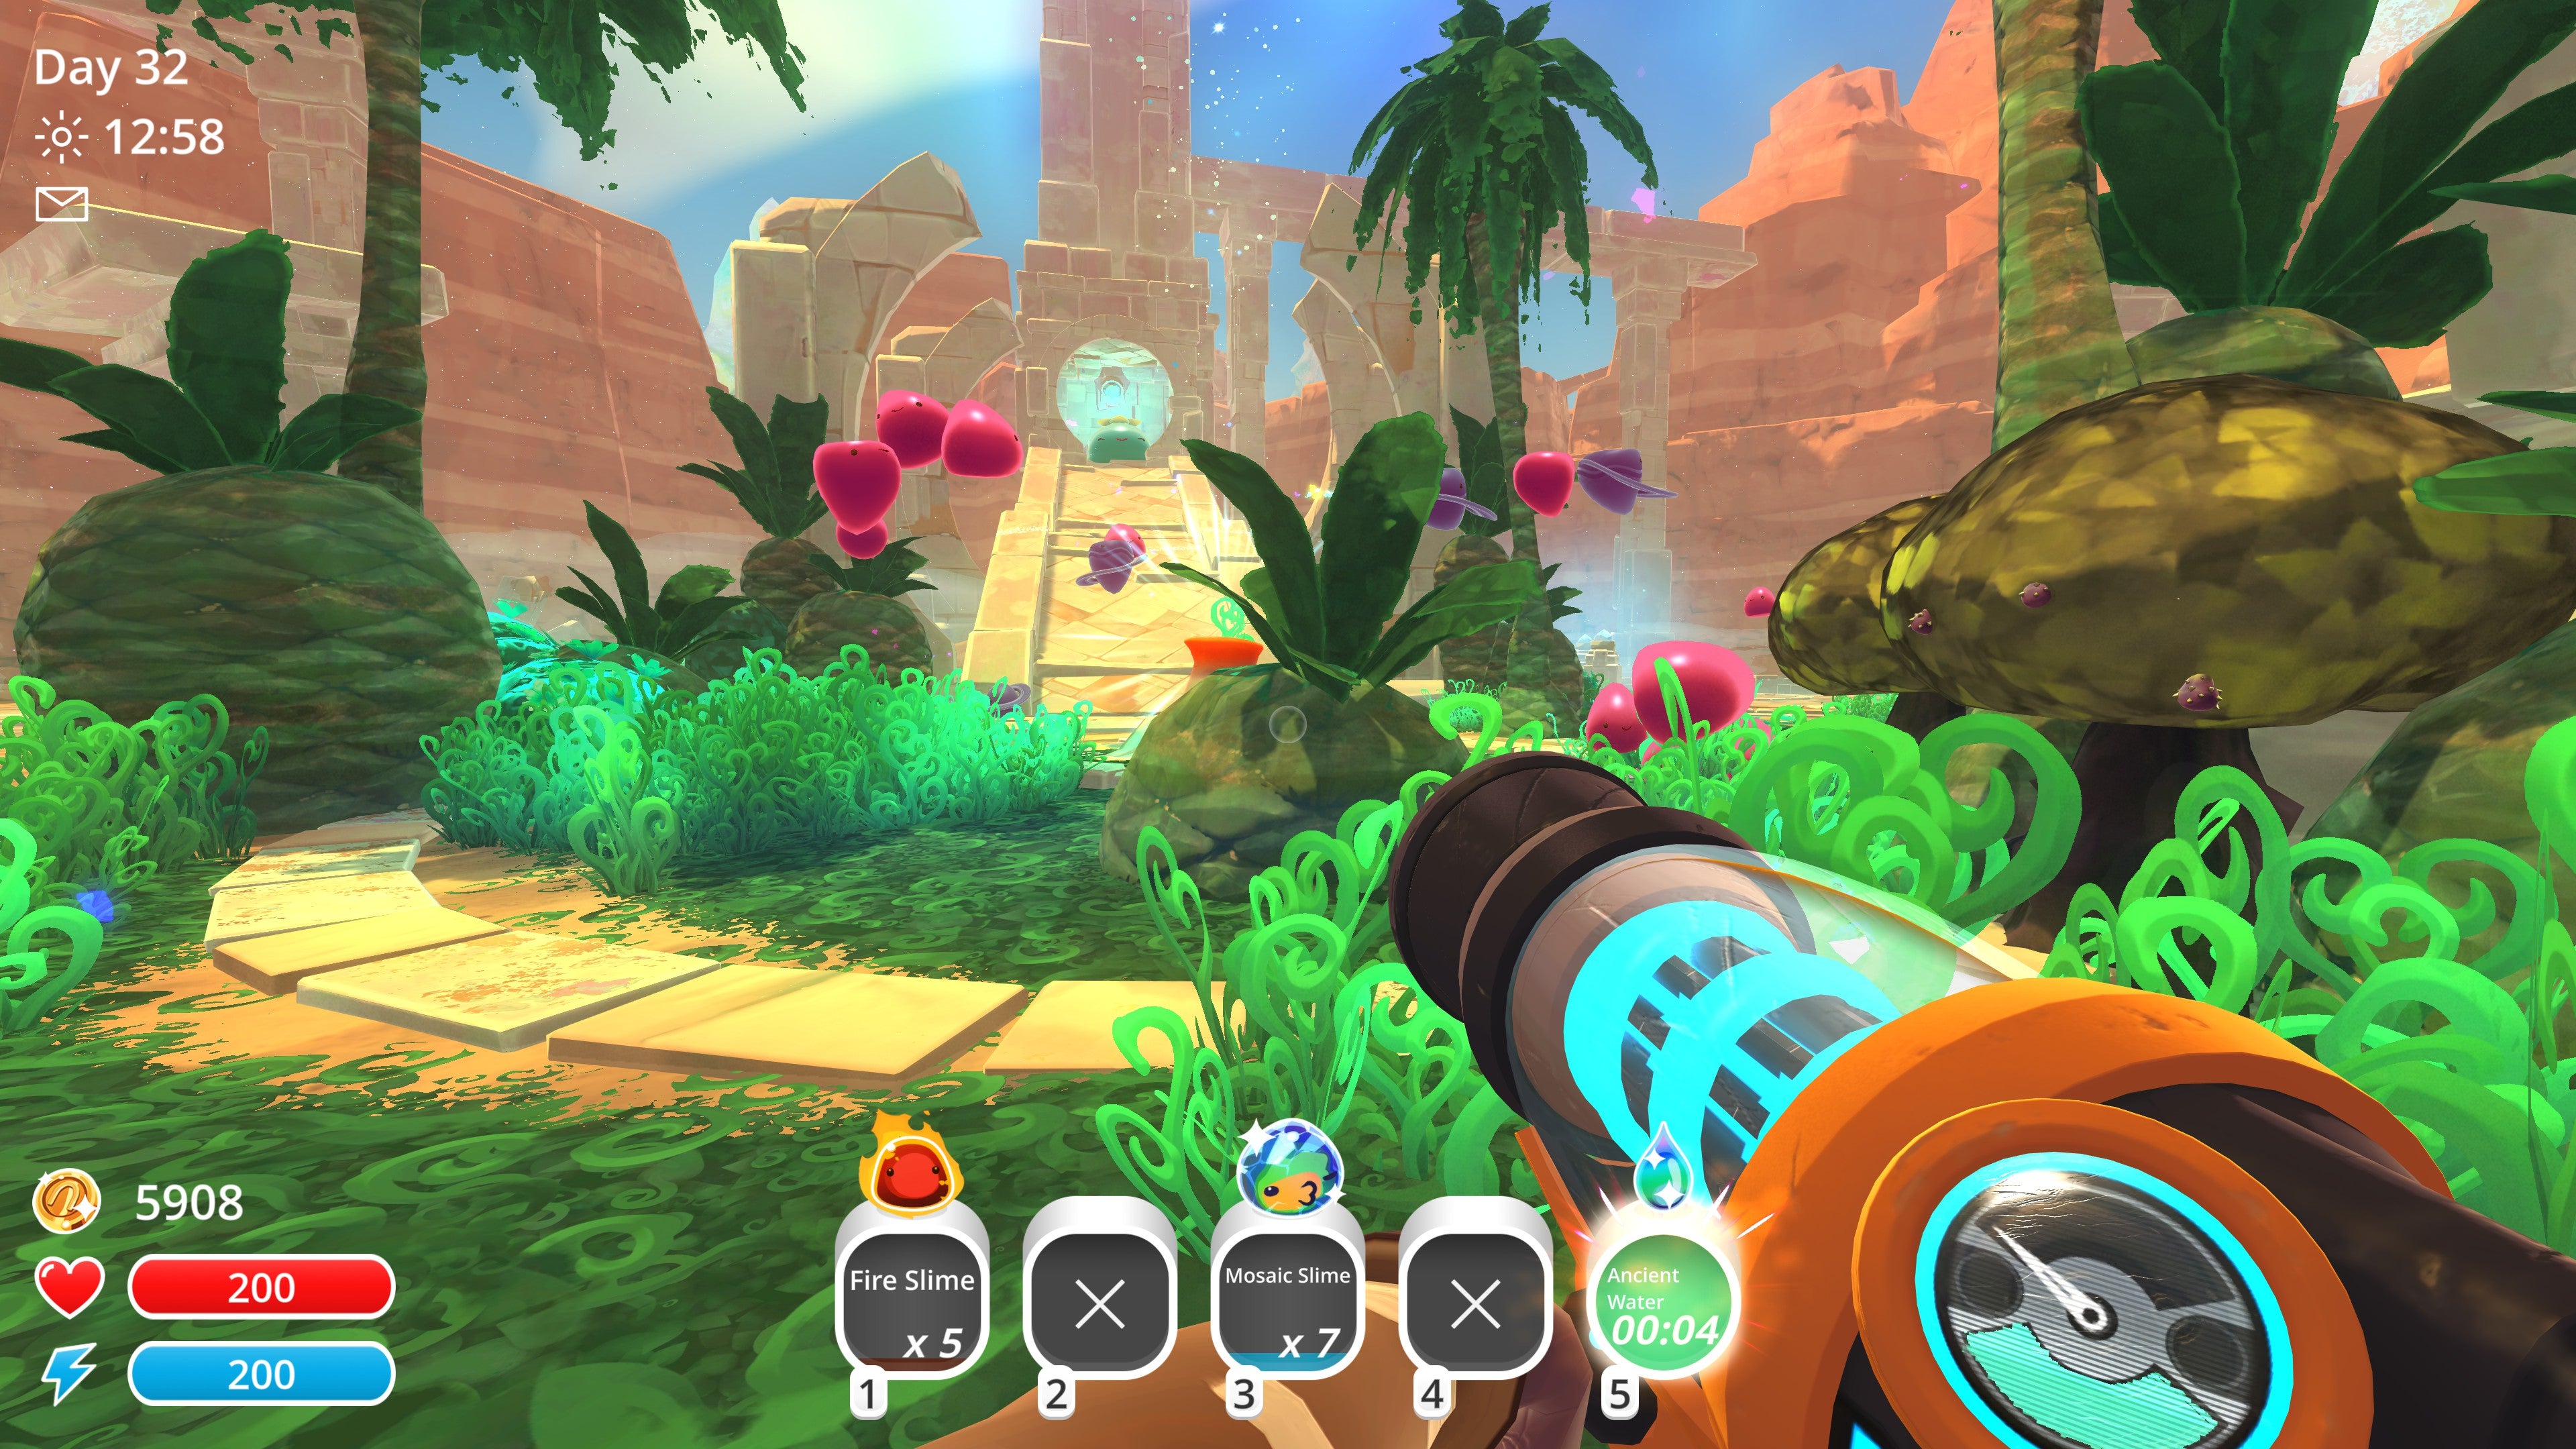 Approaching a group of pink slimes in a forest in Slime Rancher